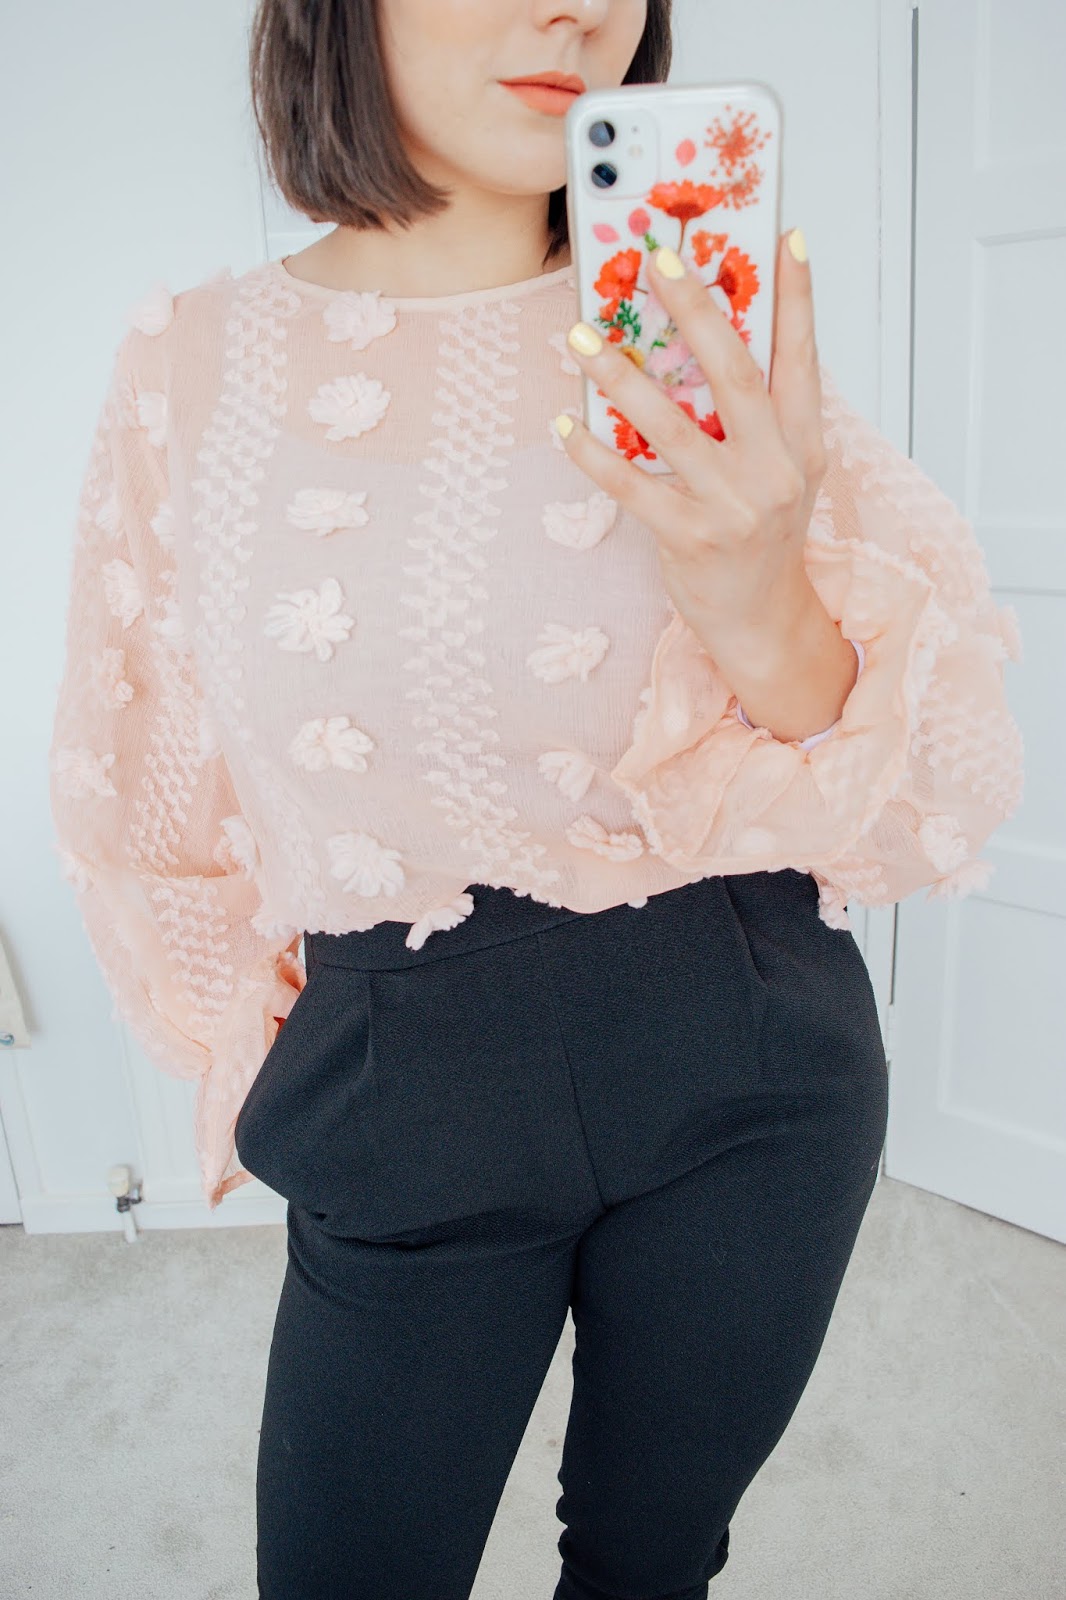 Person holding a phone wearing a pink blouse and black trousers.